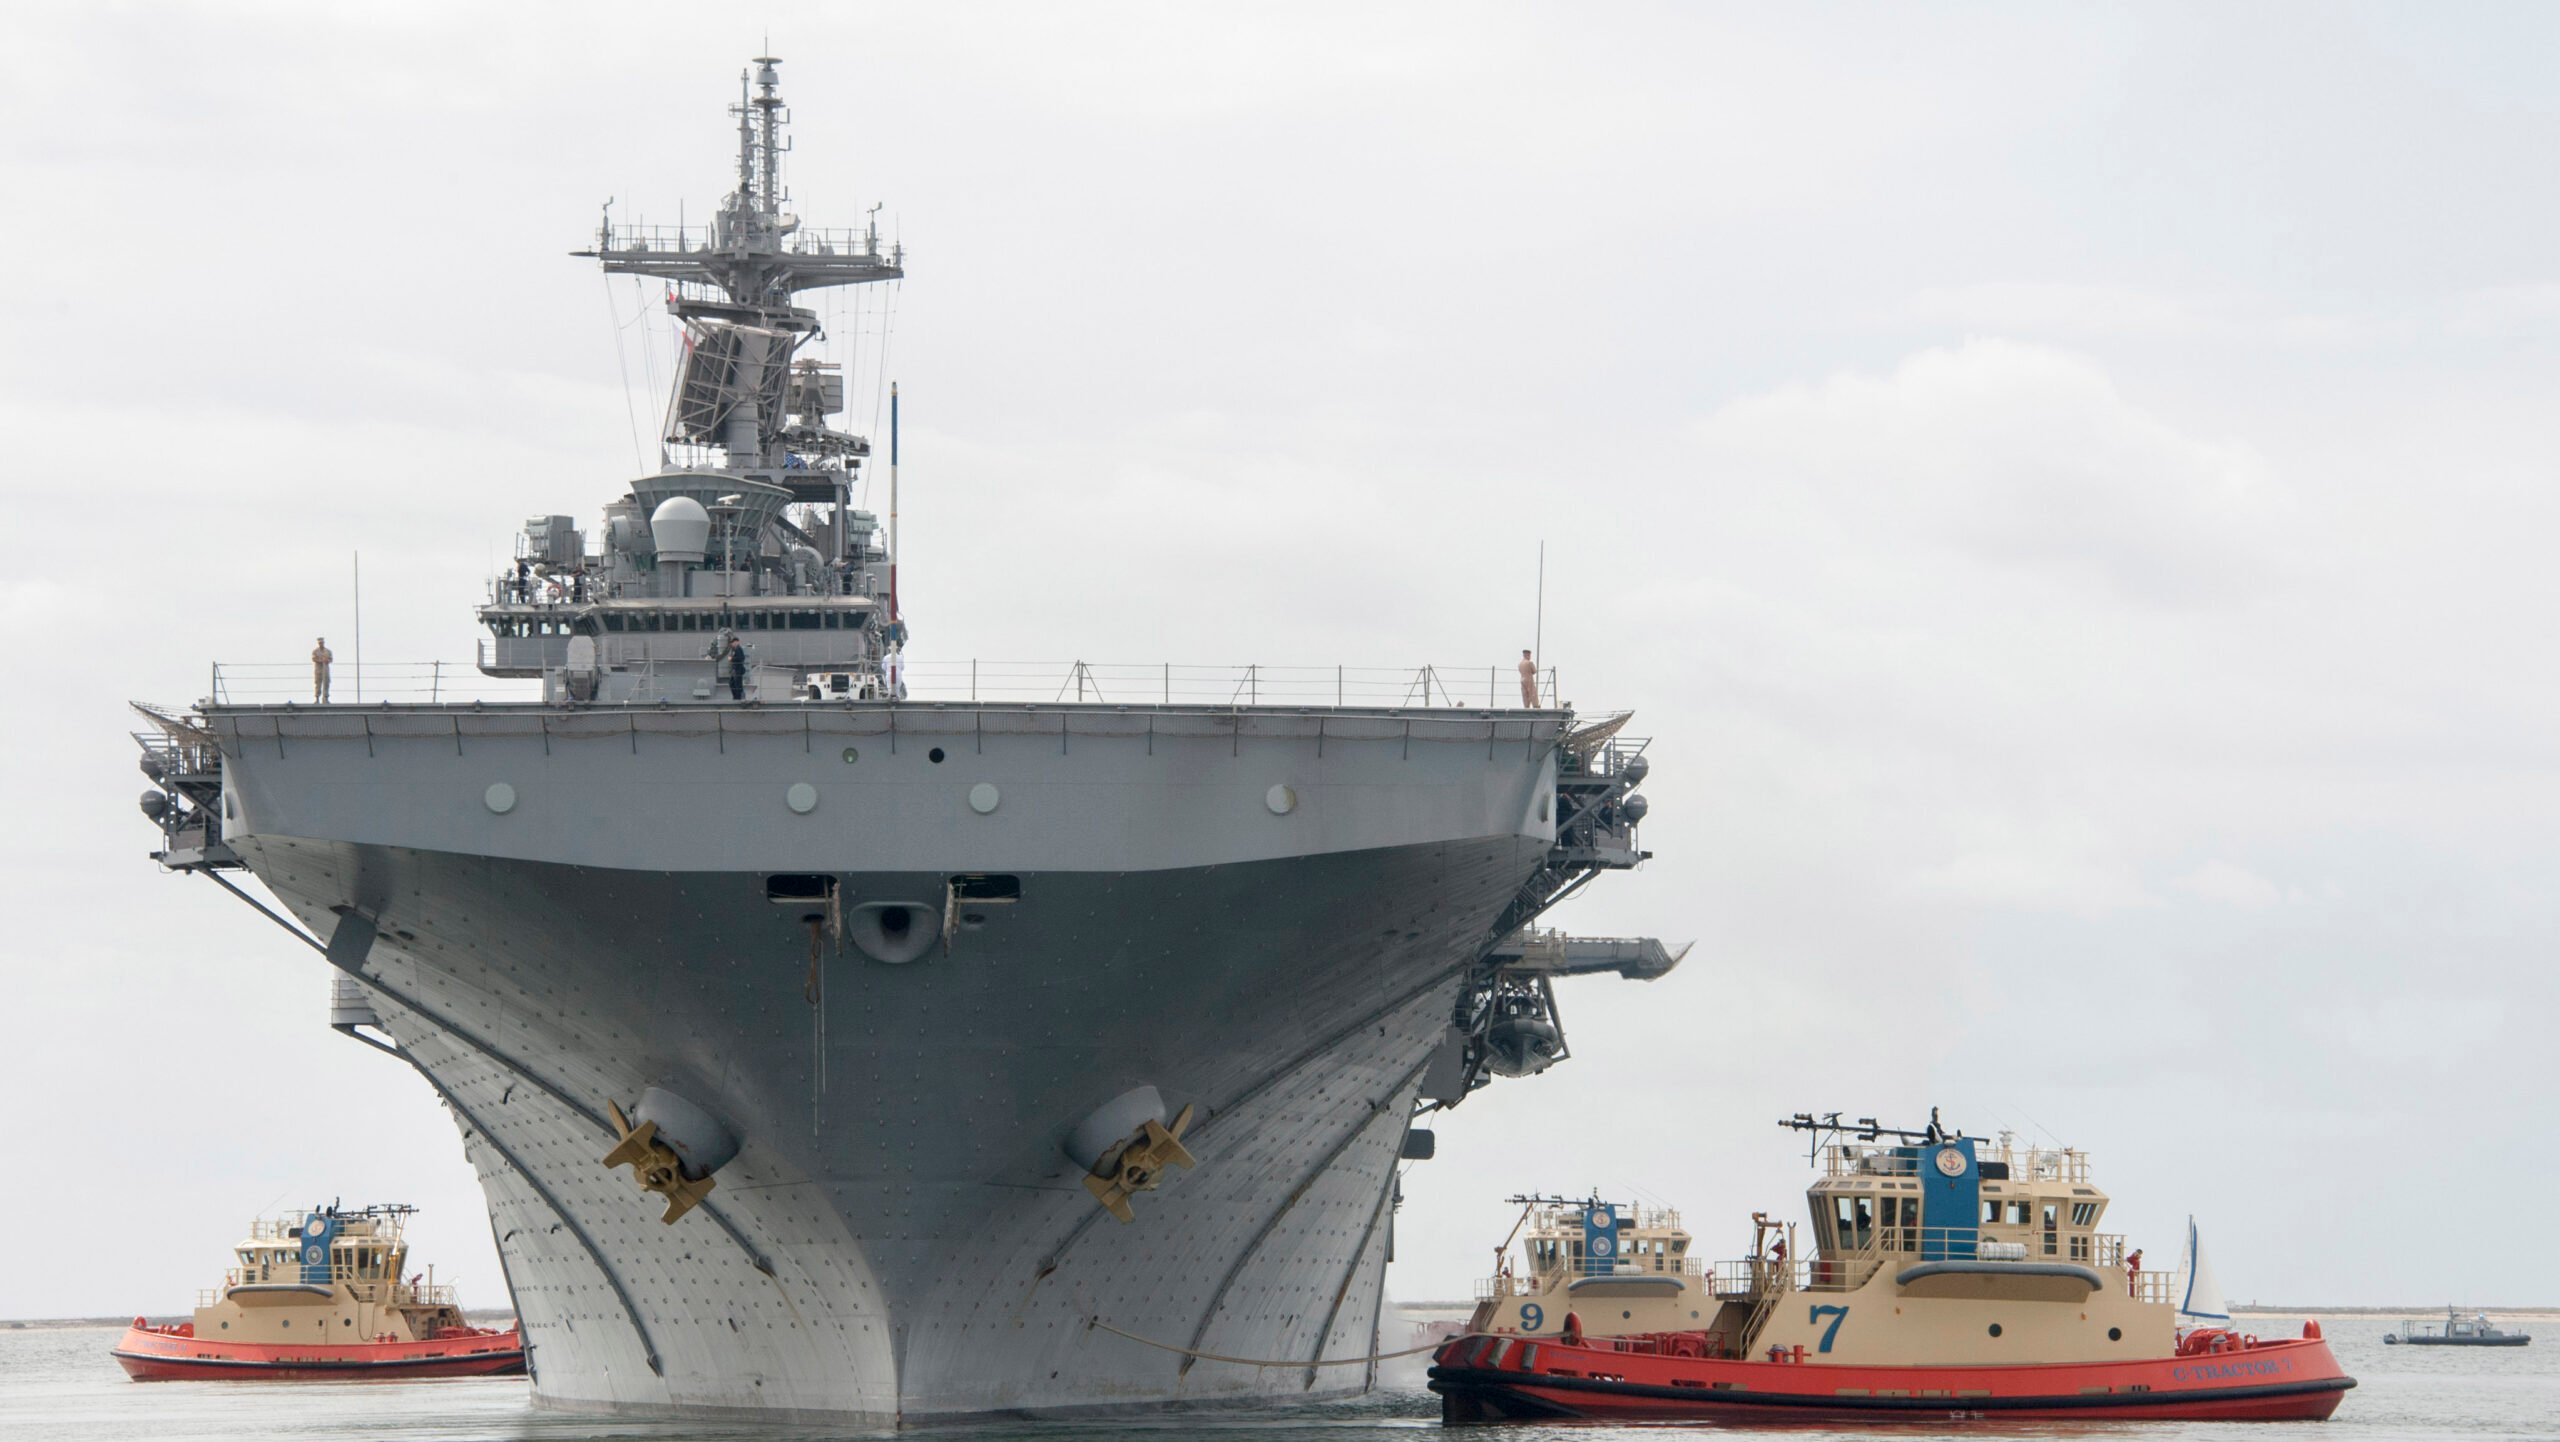 Navy secretary: Divers assessing USS Boxer breakdown, findings to be made public